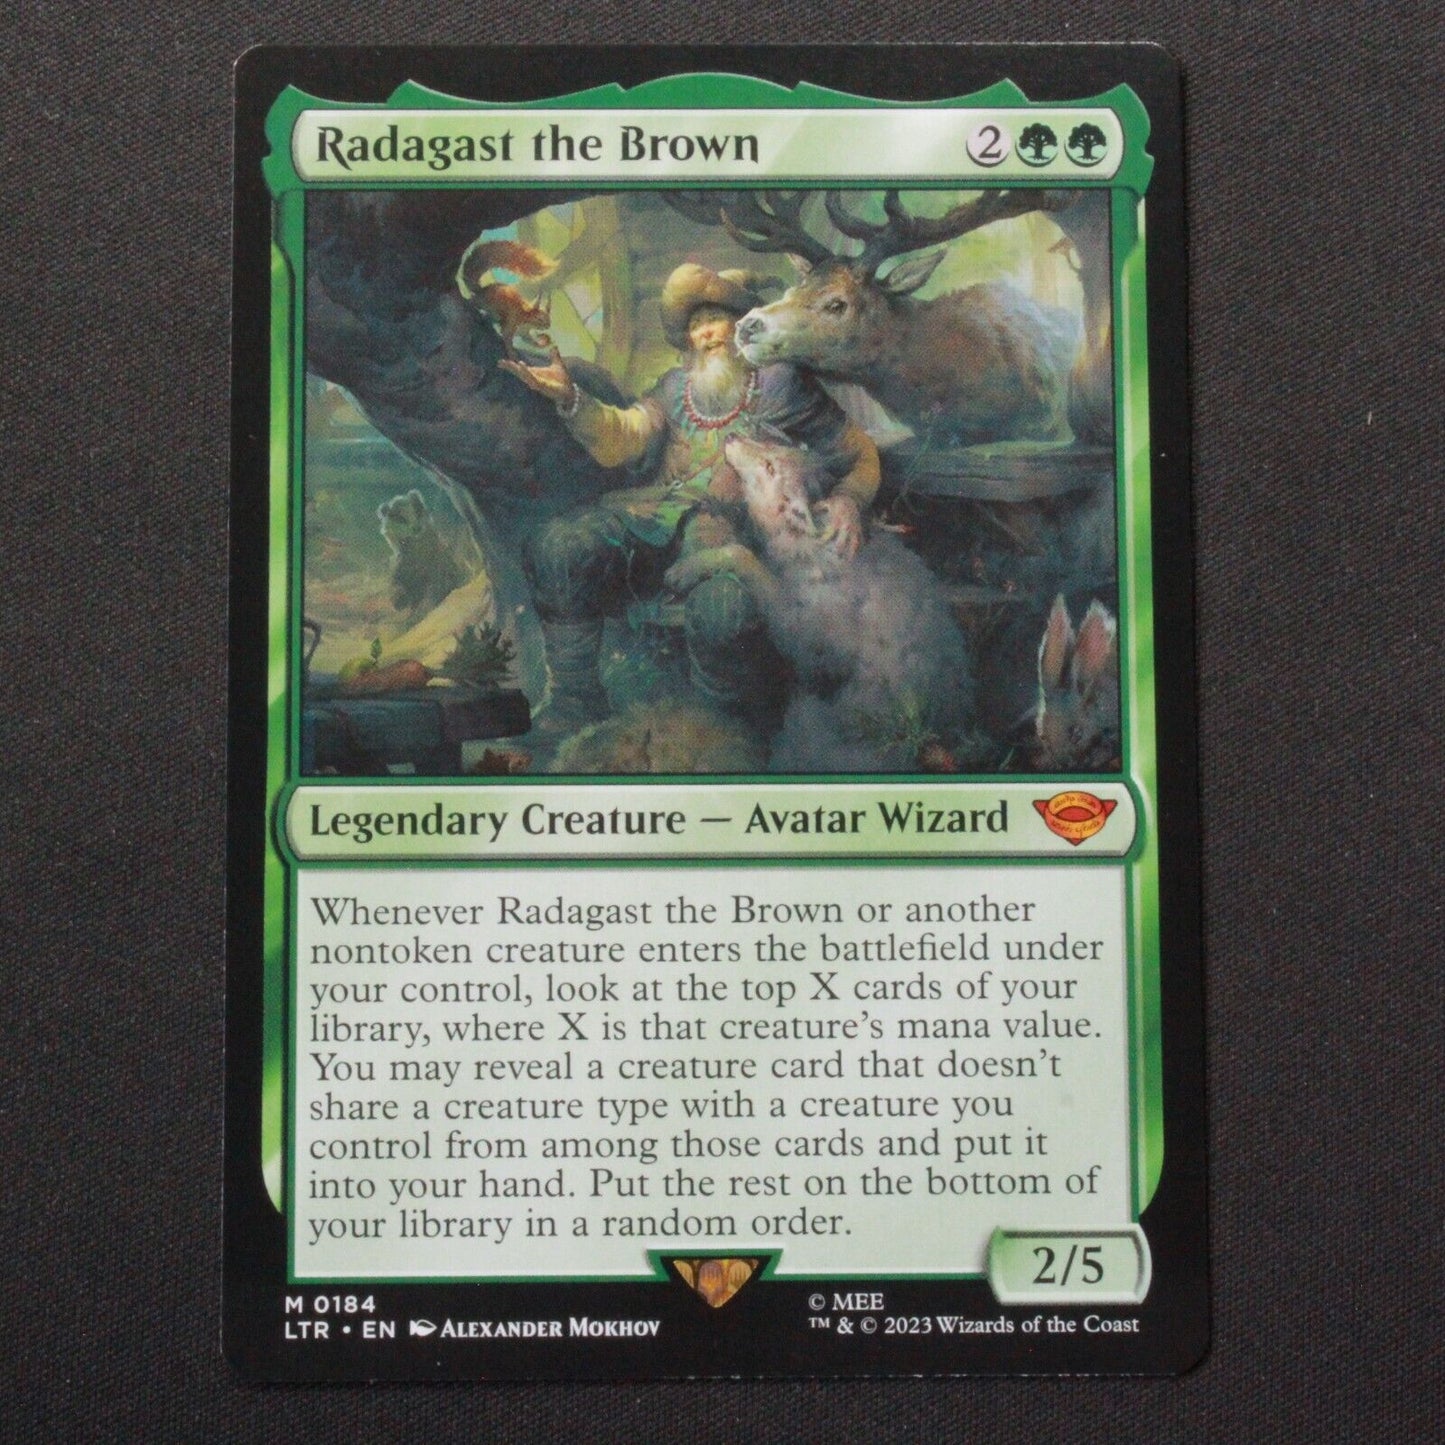 MTG The Lord of the Rings (LTR) Mythic Radagast the Brown 184 NM